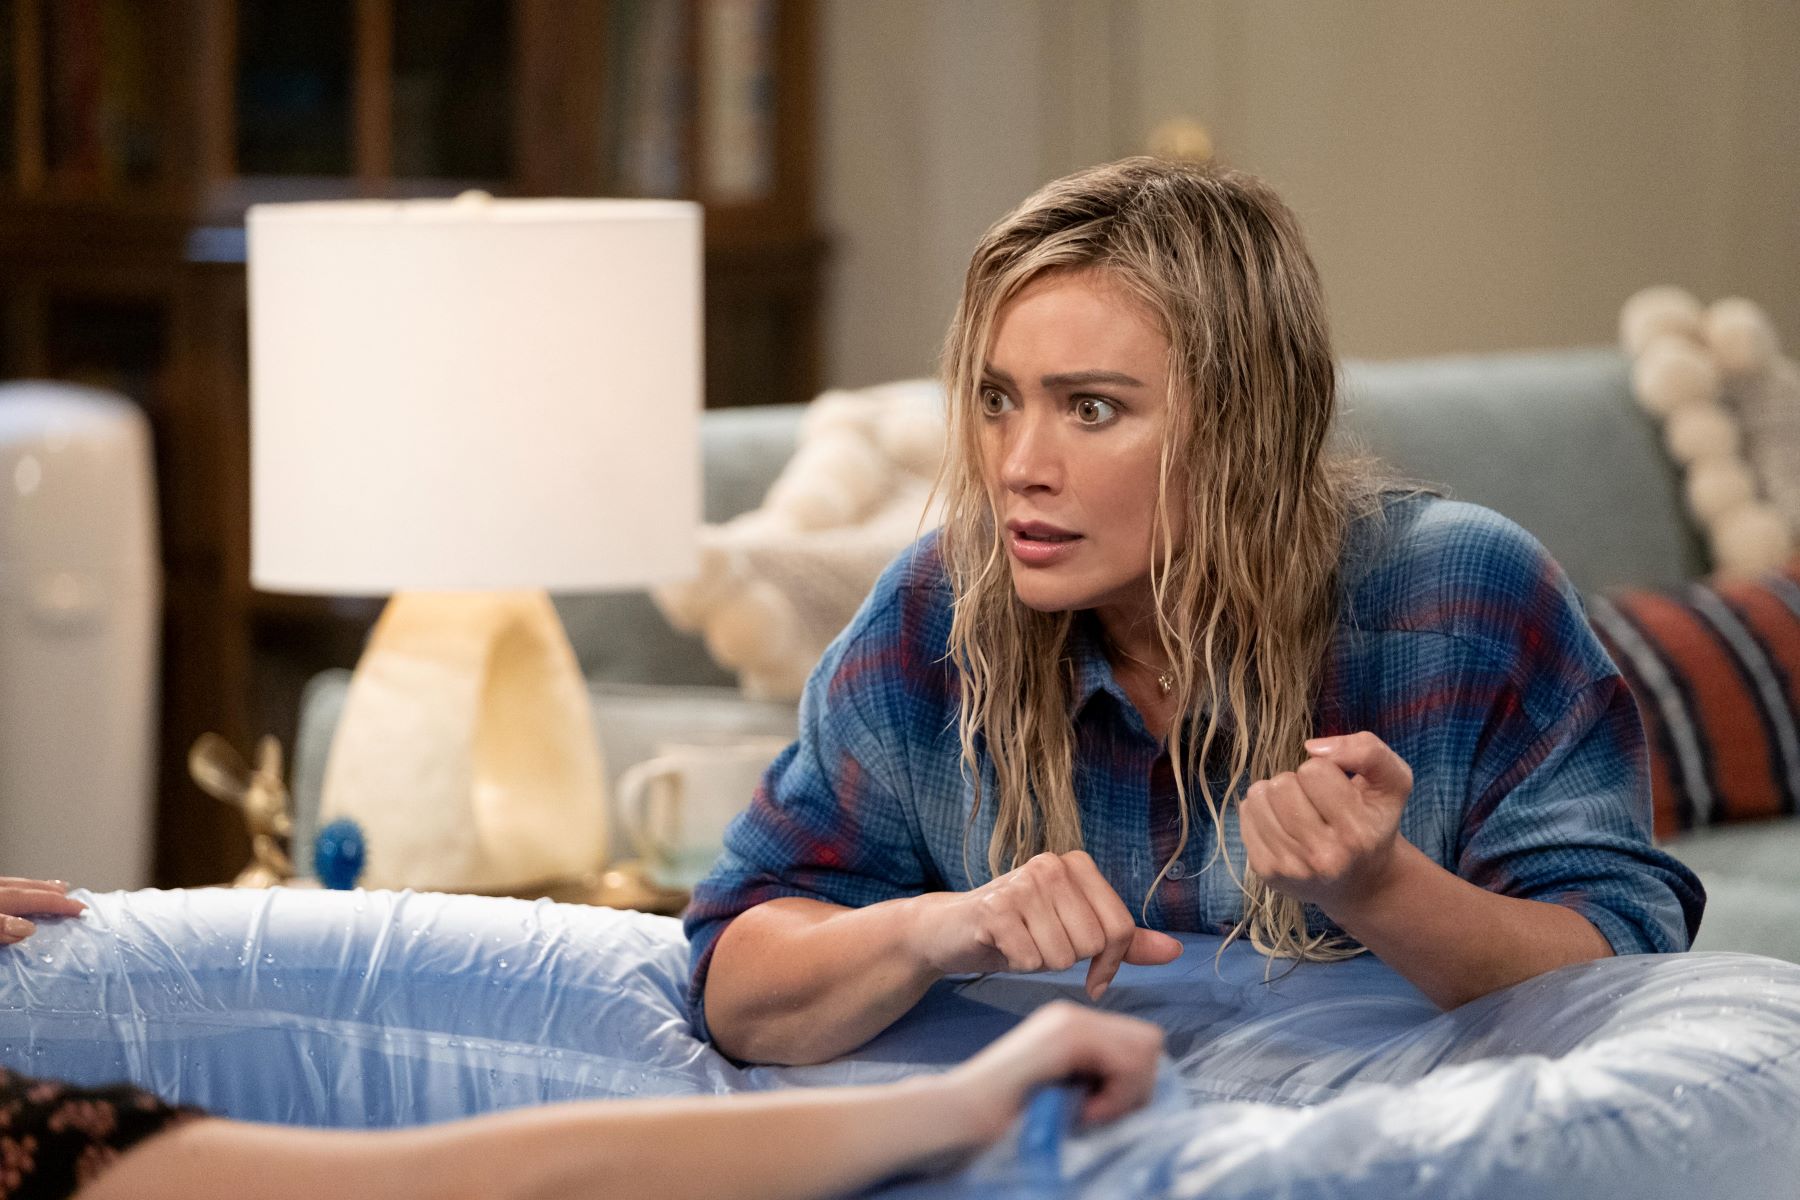 Hilary Duff, in character as Sophie in 'How I Met Your Father' Season 2, wears a blue and red plaid button-up shirt.